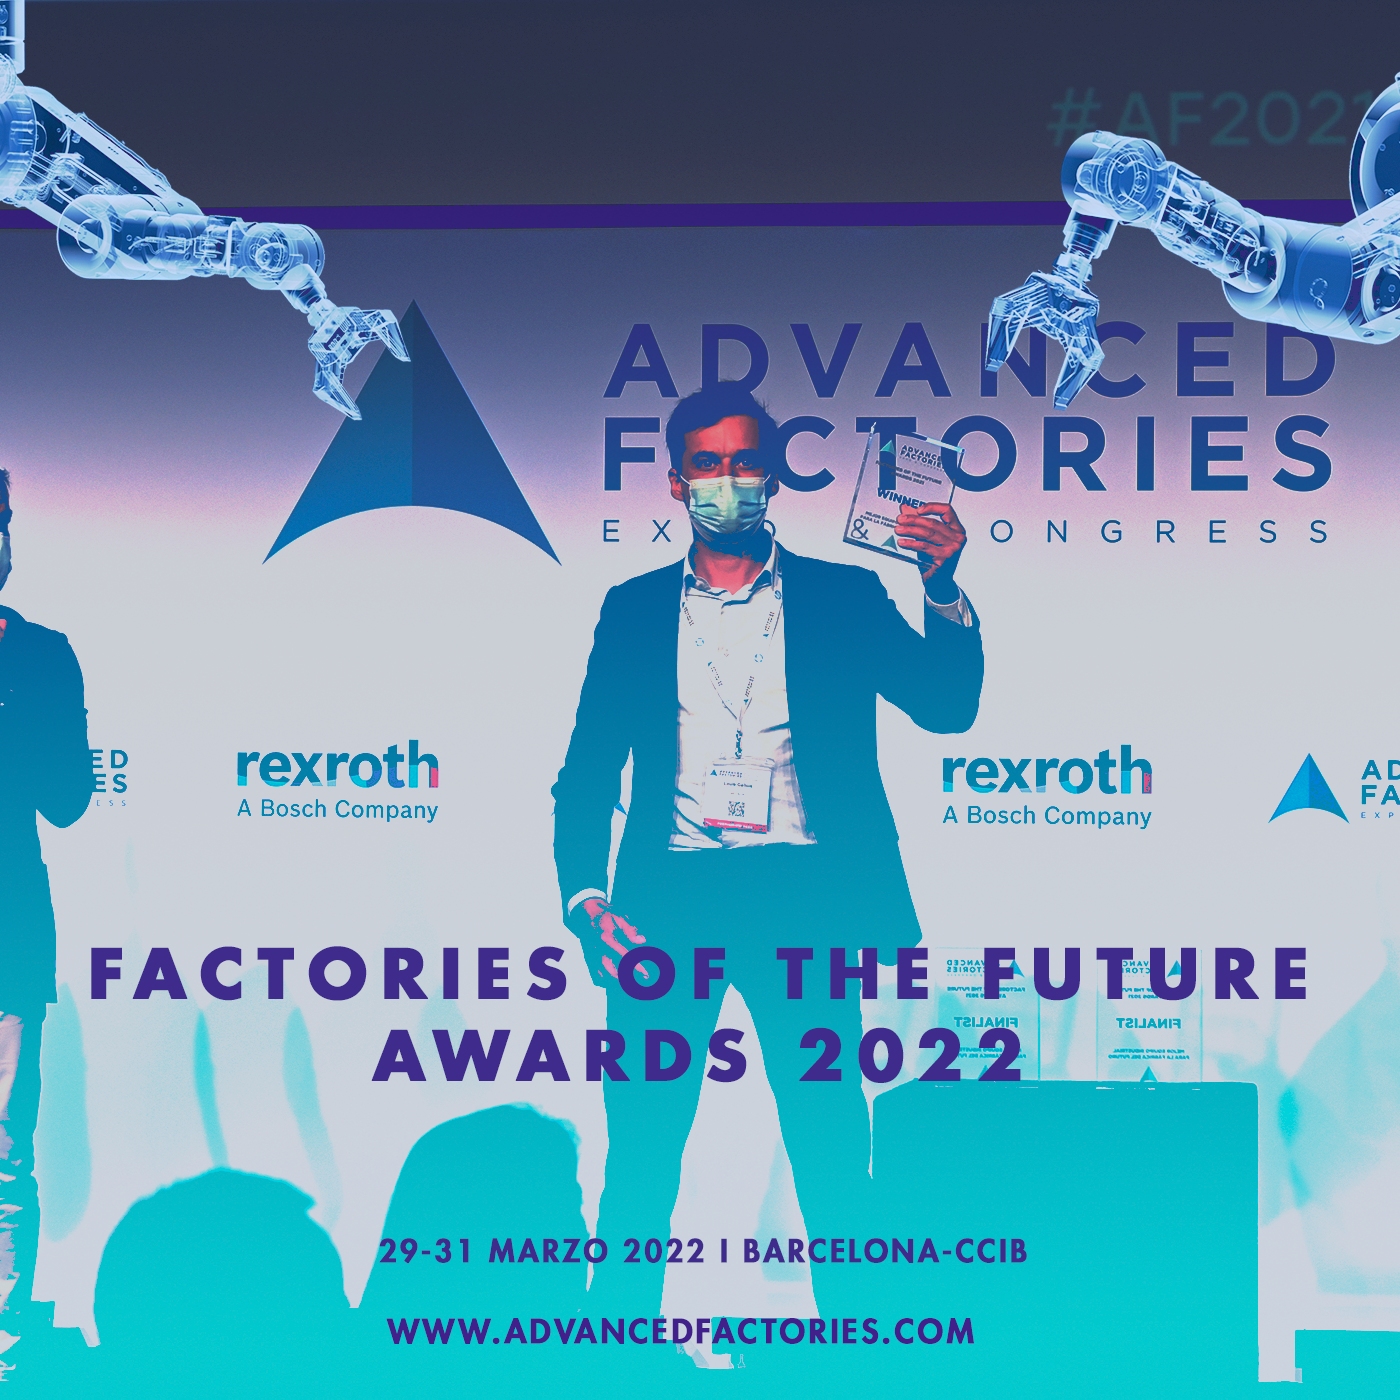 The Factories of the Future Awards 2022 reward the commitment to automation, Artificial Intelligence and sustainability in industry